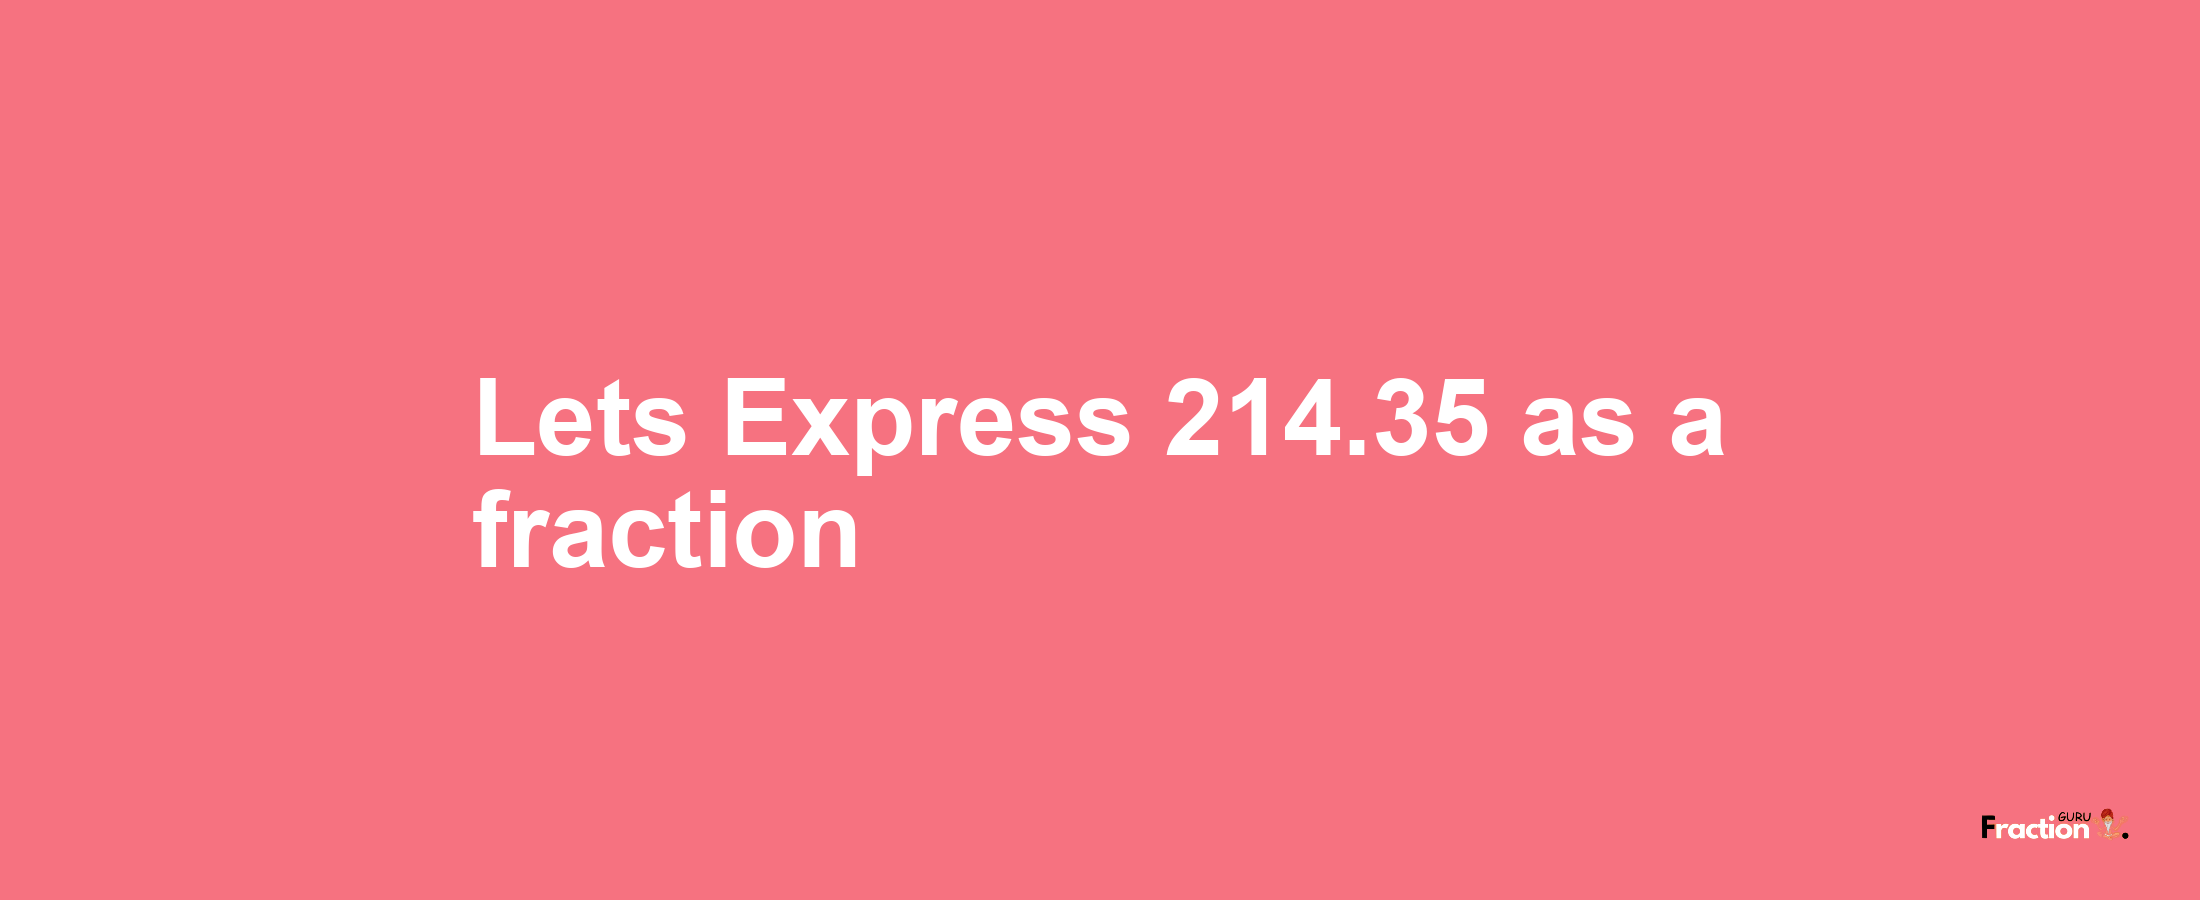 Lets Express 214.35 as afraction